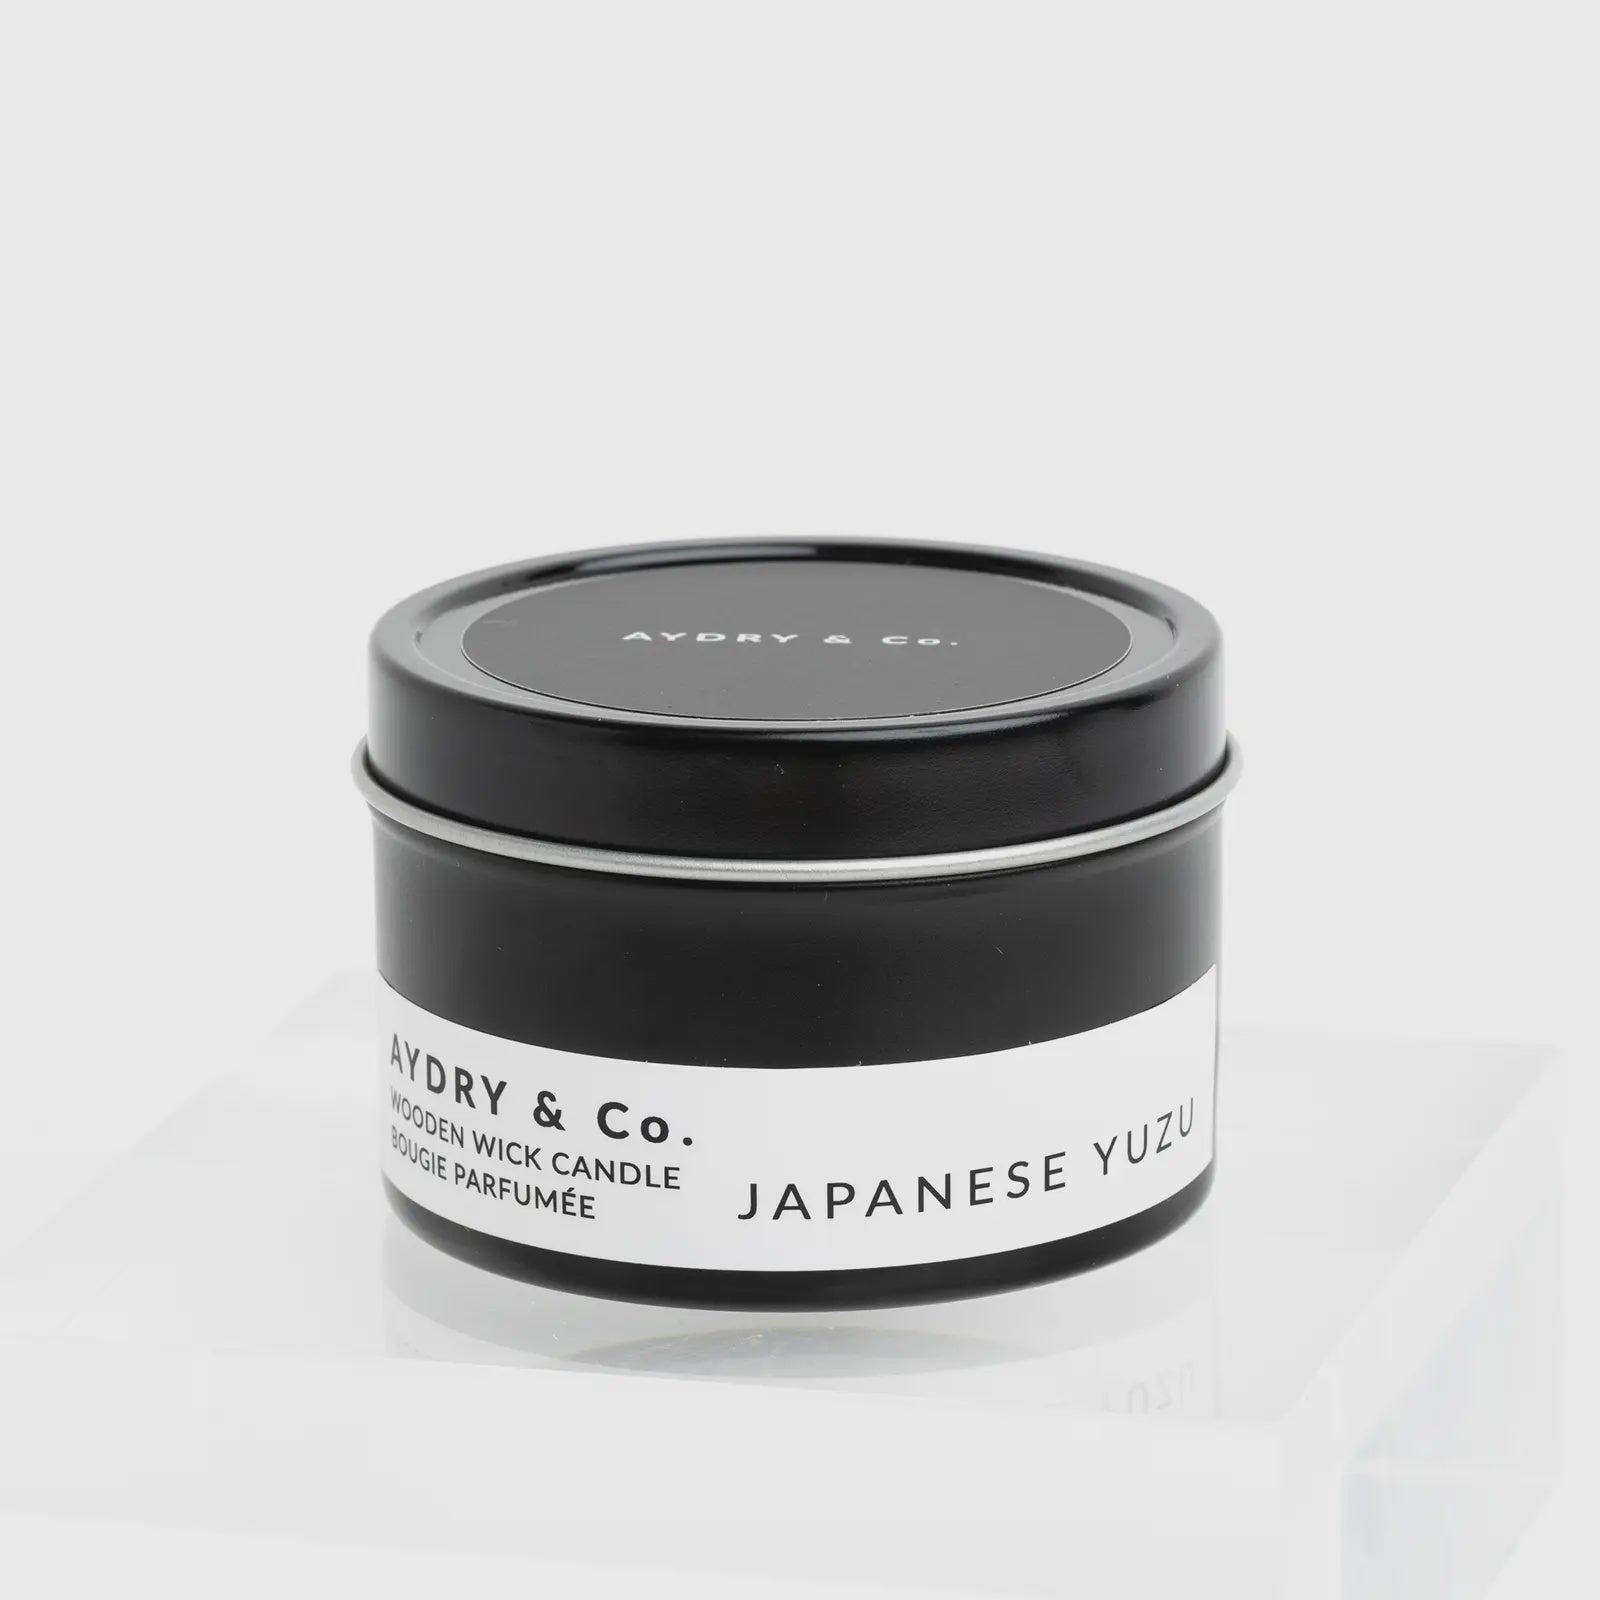 The Japanese Yuzu Mini Tin Candle by AYDRY &amp; Co.